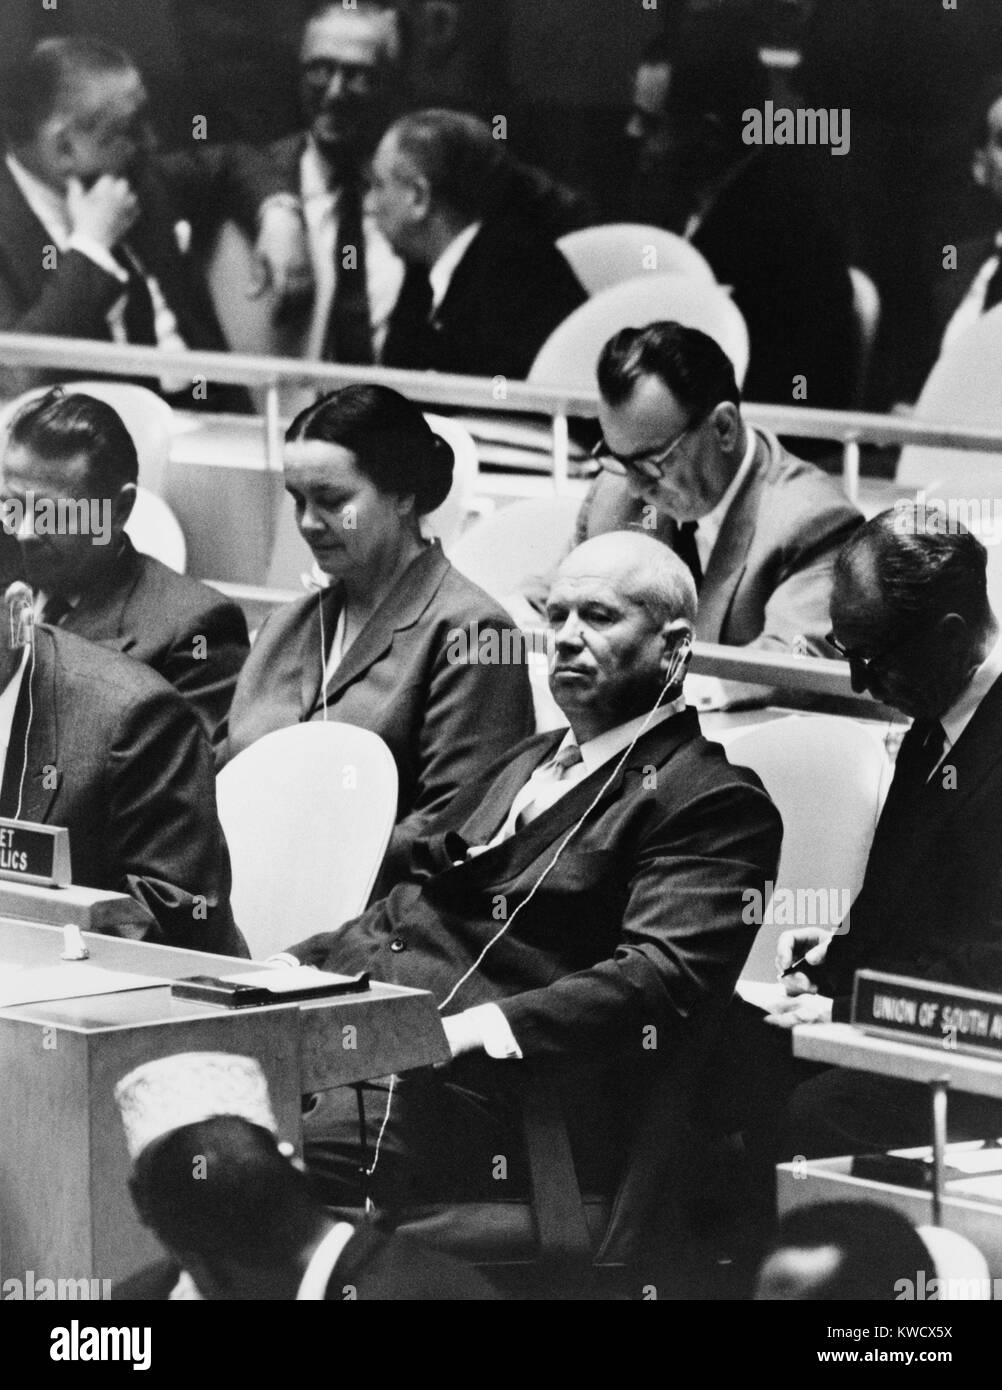 Nikita Khrushchev, leader of the Soviet Russia at the United Nations General Assembly, NYC, Sept. 22, 1960. 1960-1962 were years of high tension between the Soviet Union and the US, with many dramas played out in the UN (BSLOC 2017 2 194) Stock Photo